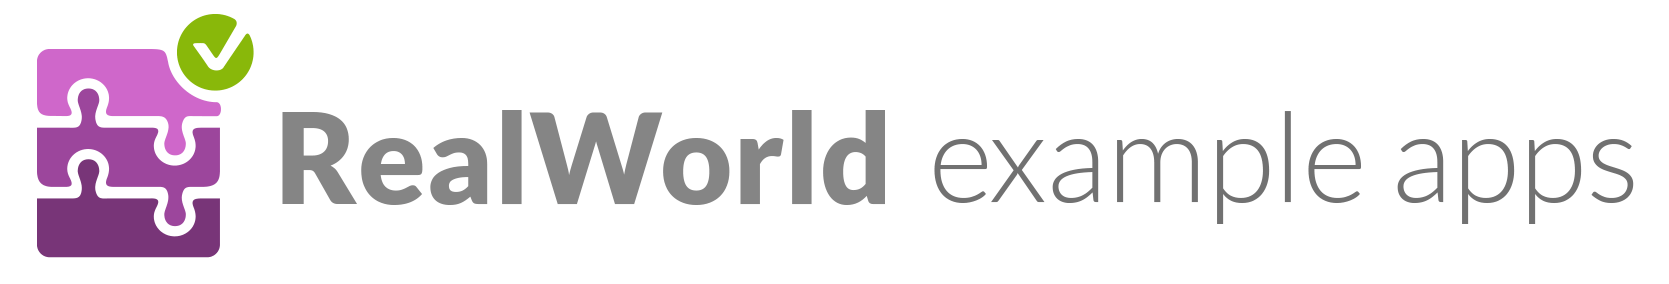 RealWorld example apps cover